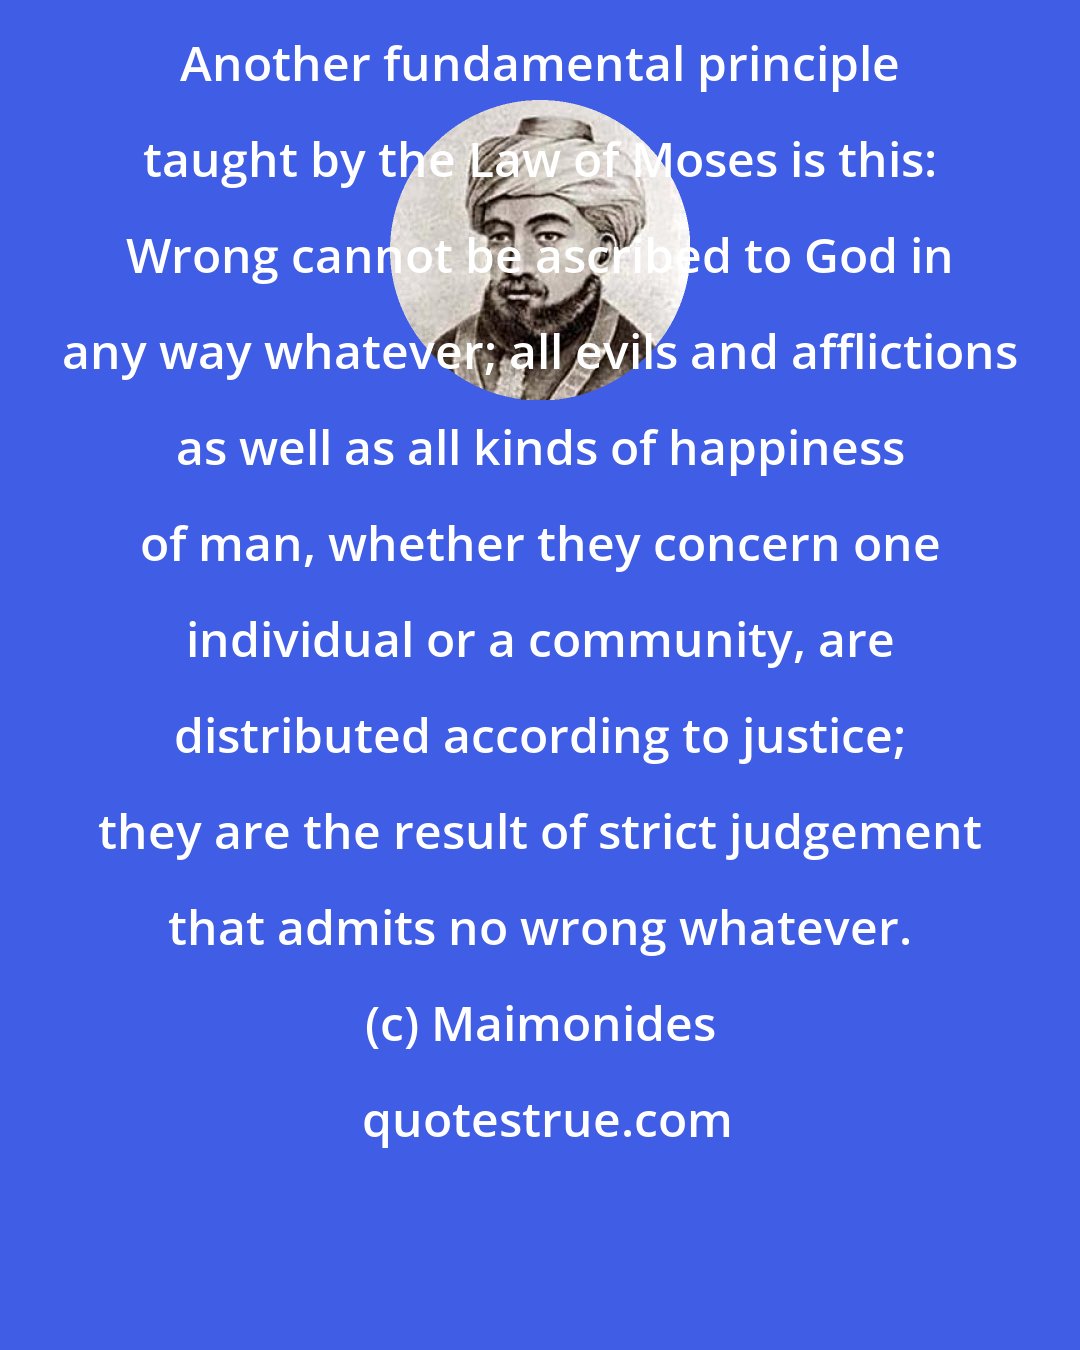 Maimonides: Another fundamental principle taught by the Law of Moses is this: Wrong cannot be ascribed to God in any way whatever; all evils and afflictions as well as all kinds of happiness of man, whether they concern one individual or a community, are distributed according to justice; they are the result of strict judgement that admits no wrong whatever.